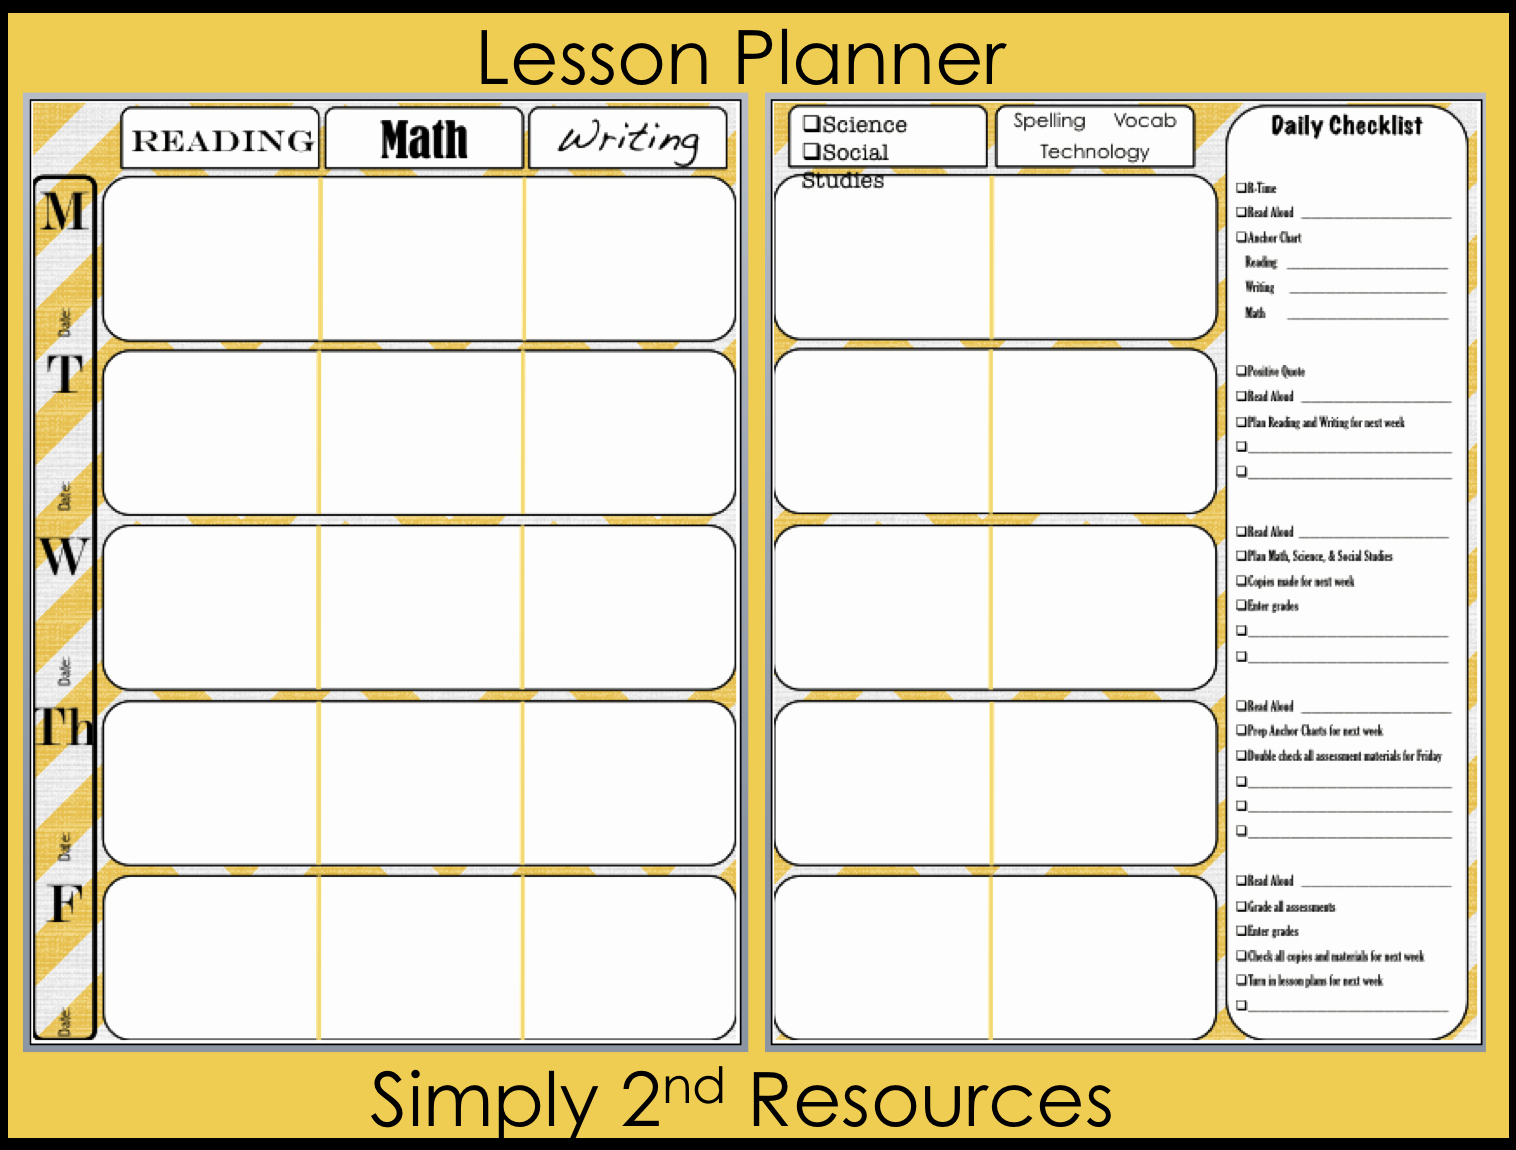 Lesson Plan Template for Teachers Fresh Simply 2nd Resources Lesson Plan Template so Excited to